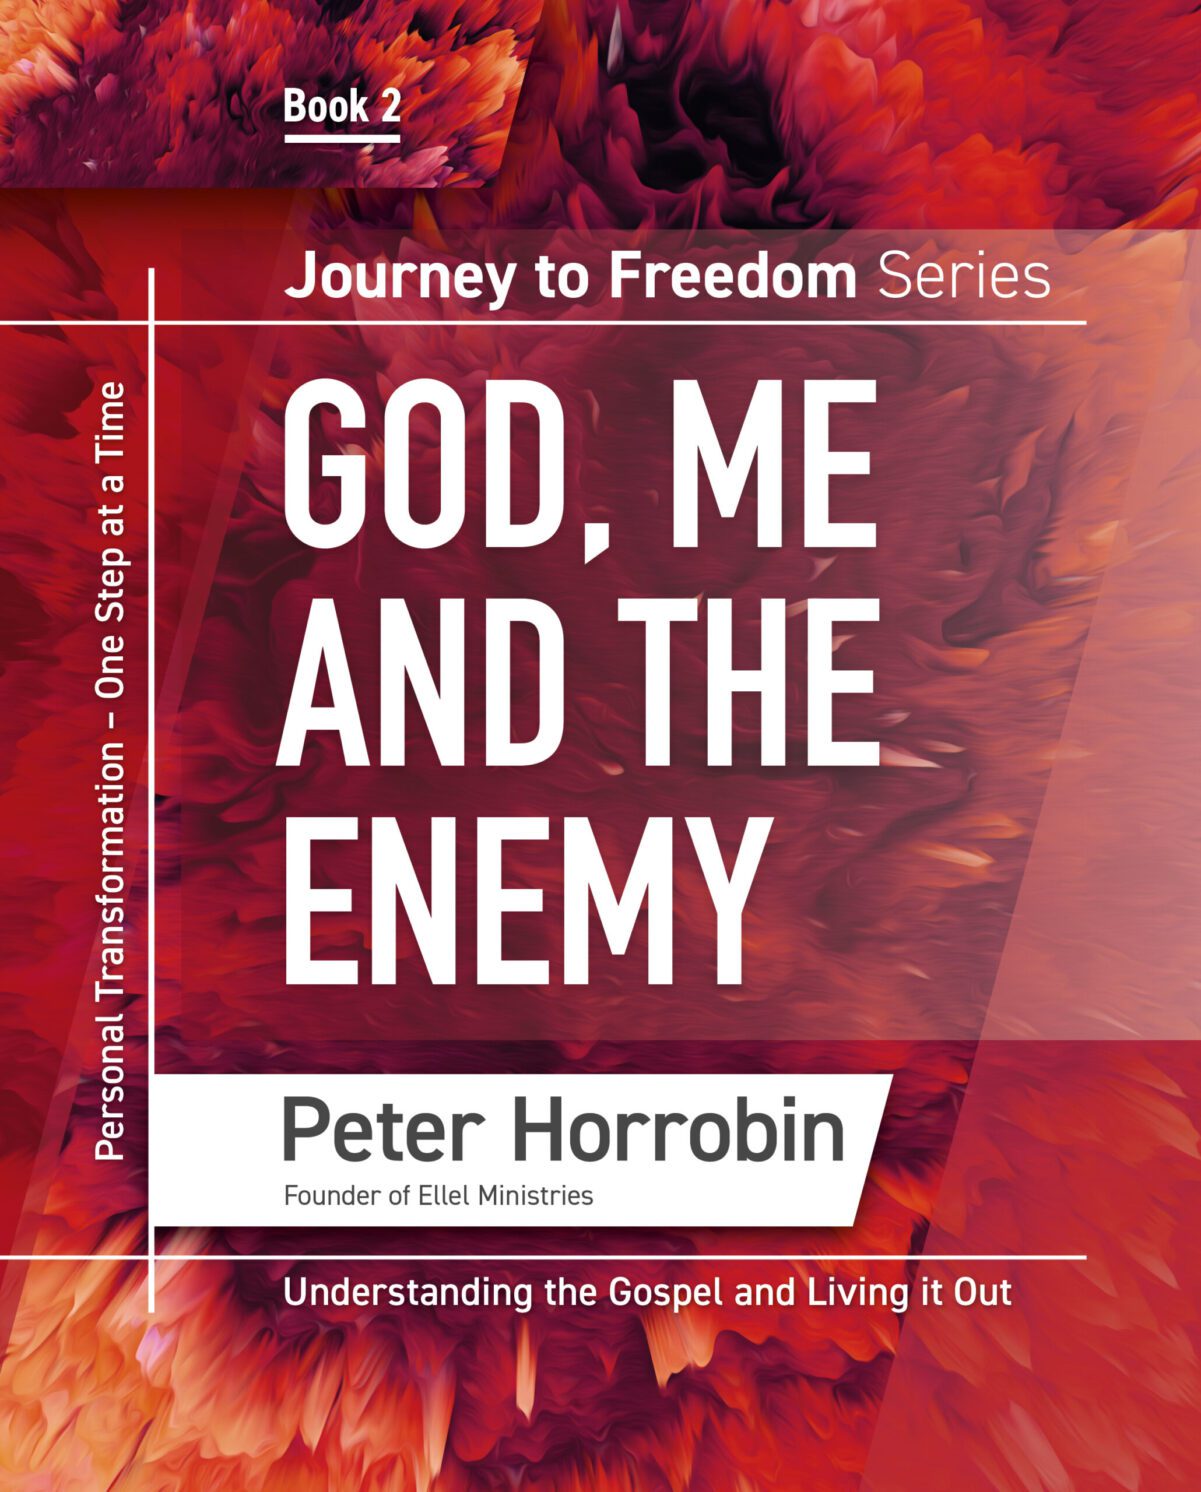 Journey to Freedom Book 2 – God, Me and the Enemy